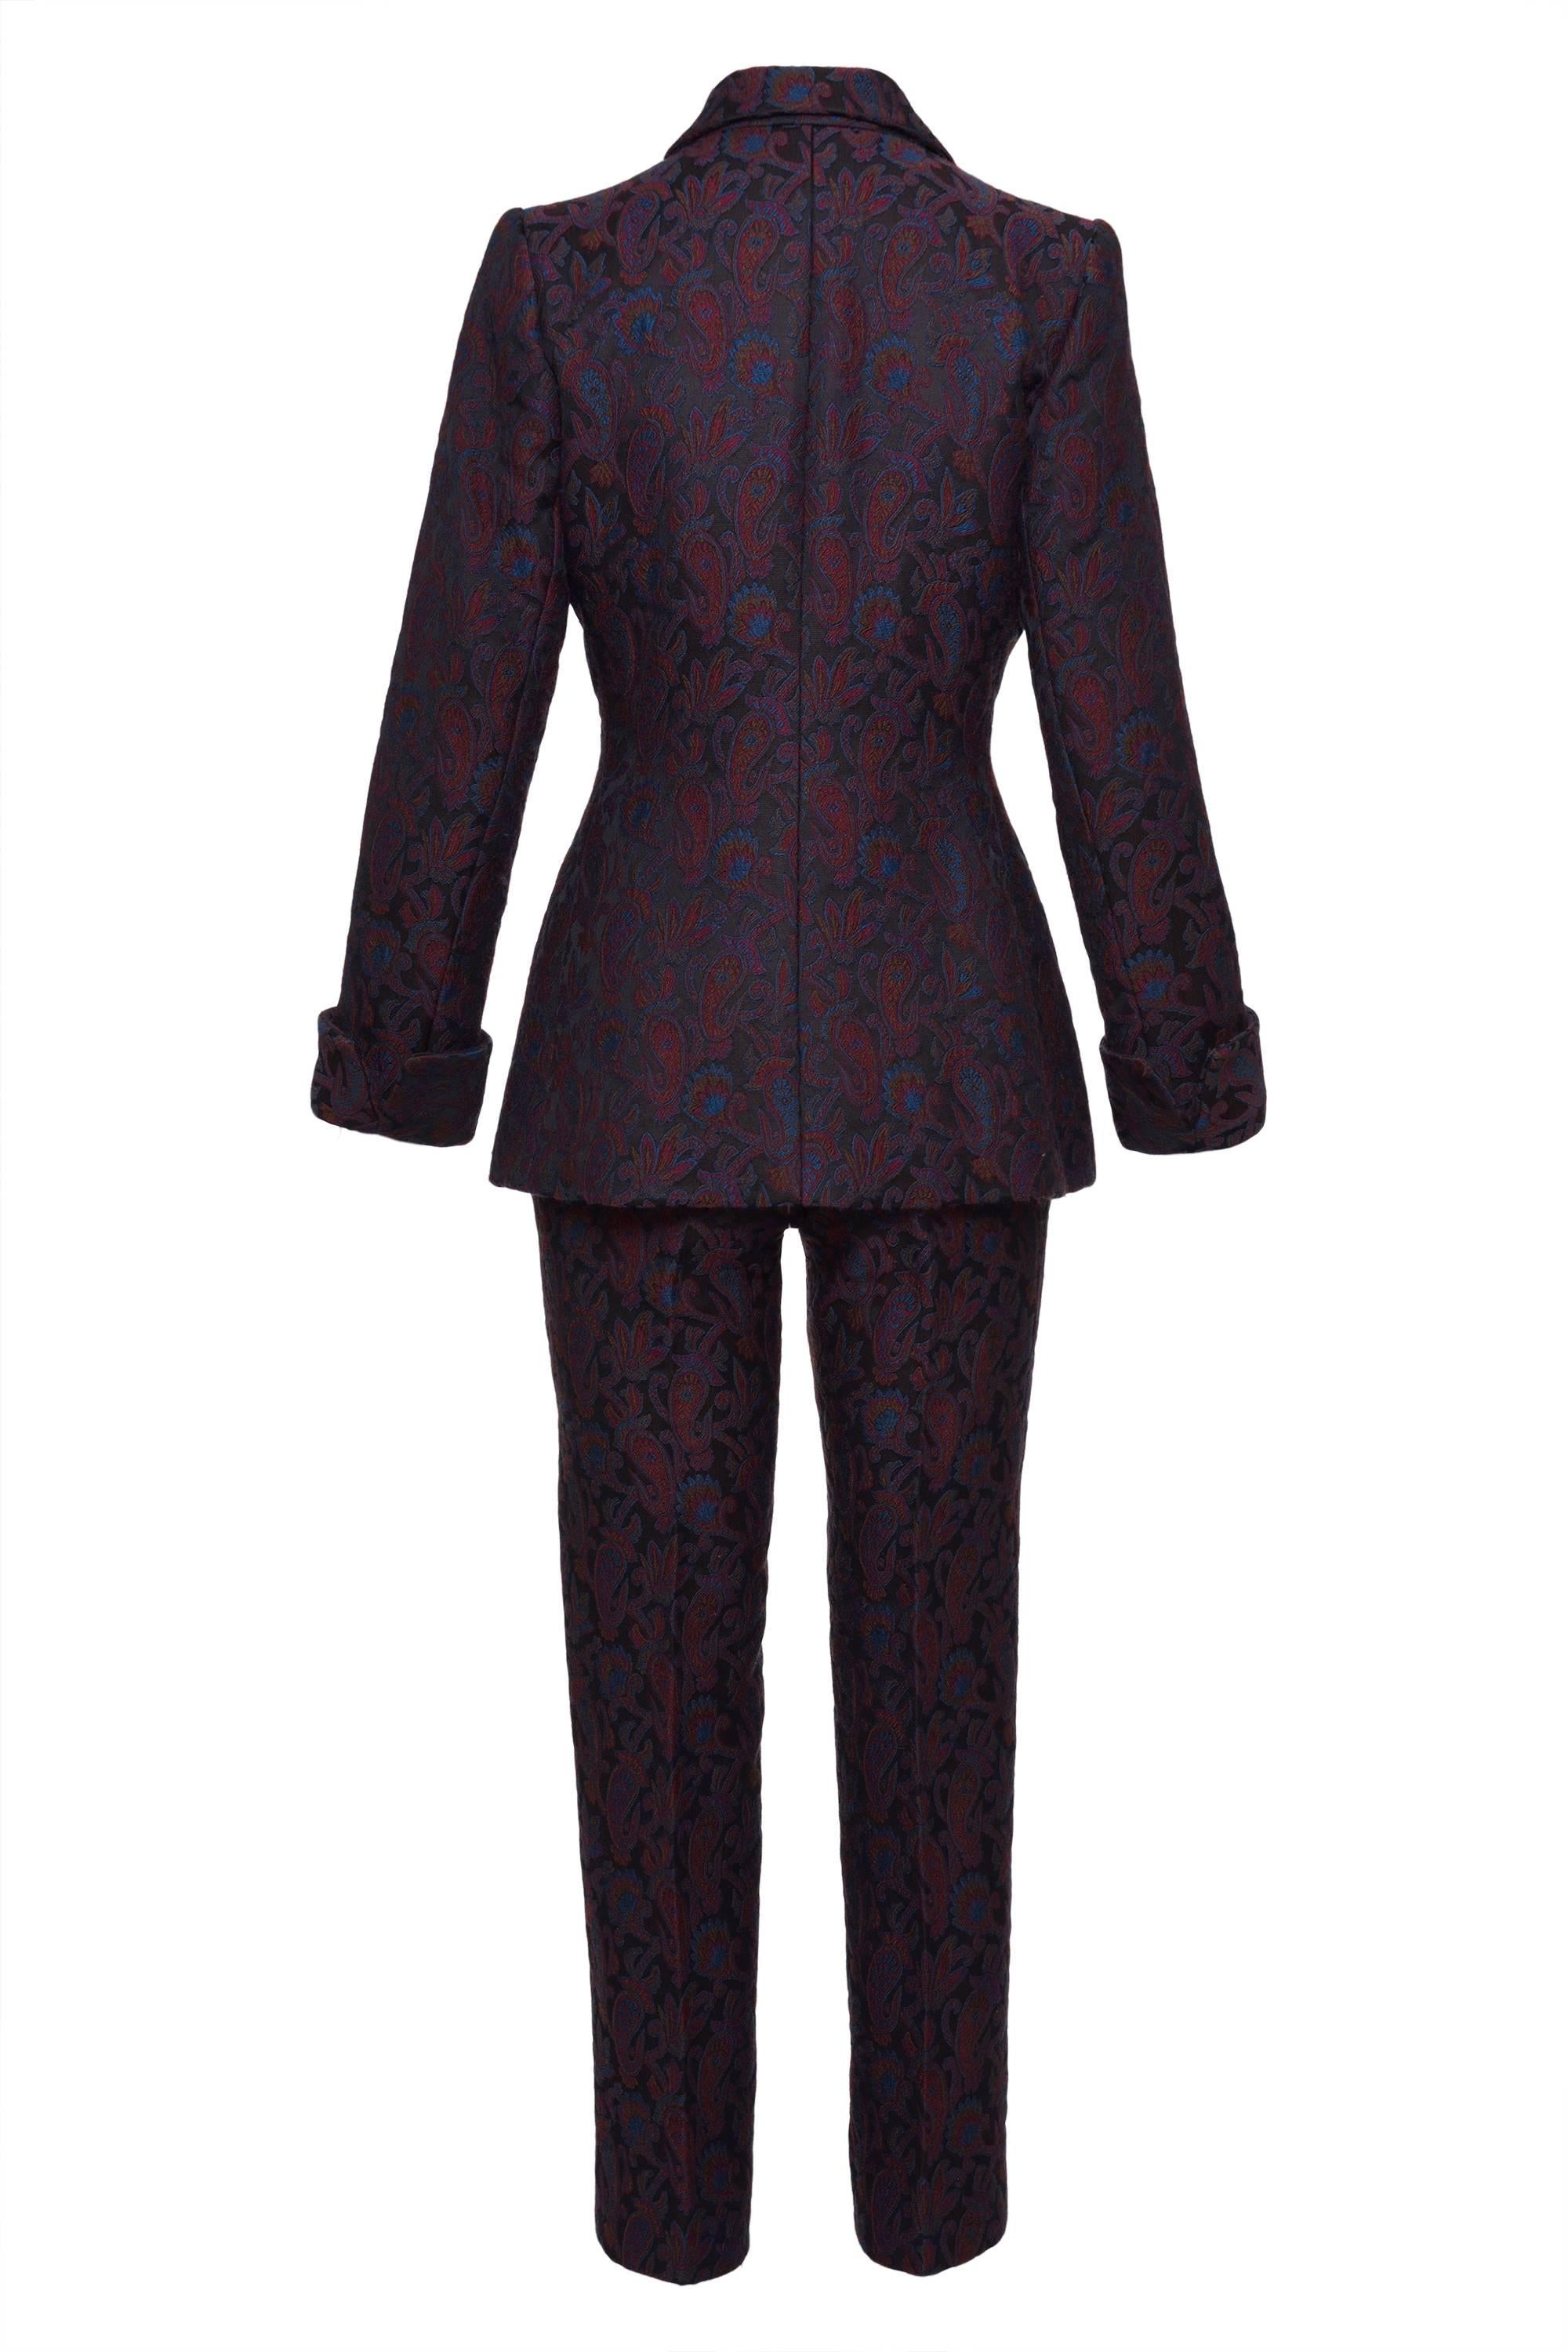 This stunning 1980s Saint Laurent Rive Gauche suit pants is in brocade paisley print wool and silk fabric. The jacket has a button jewelry and asymmetric closure and fully satin lined. The pants has front zip and button closure and two frontal